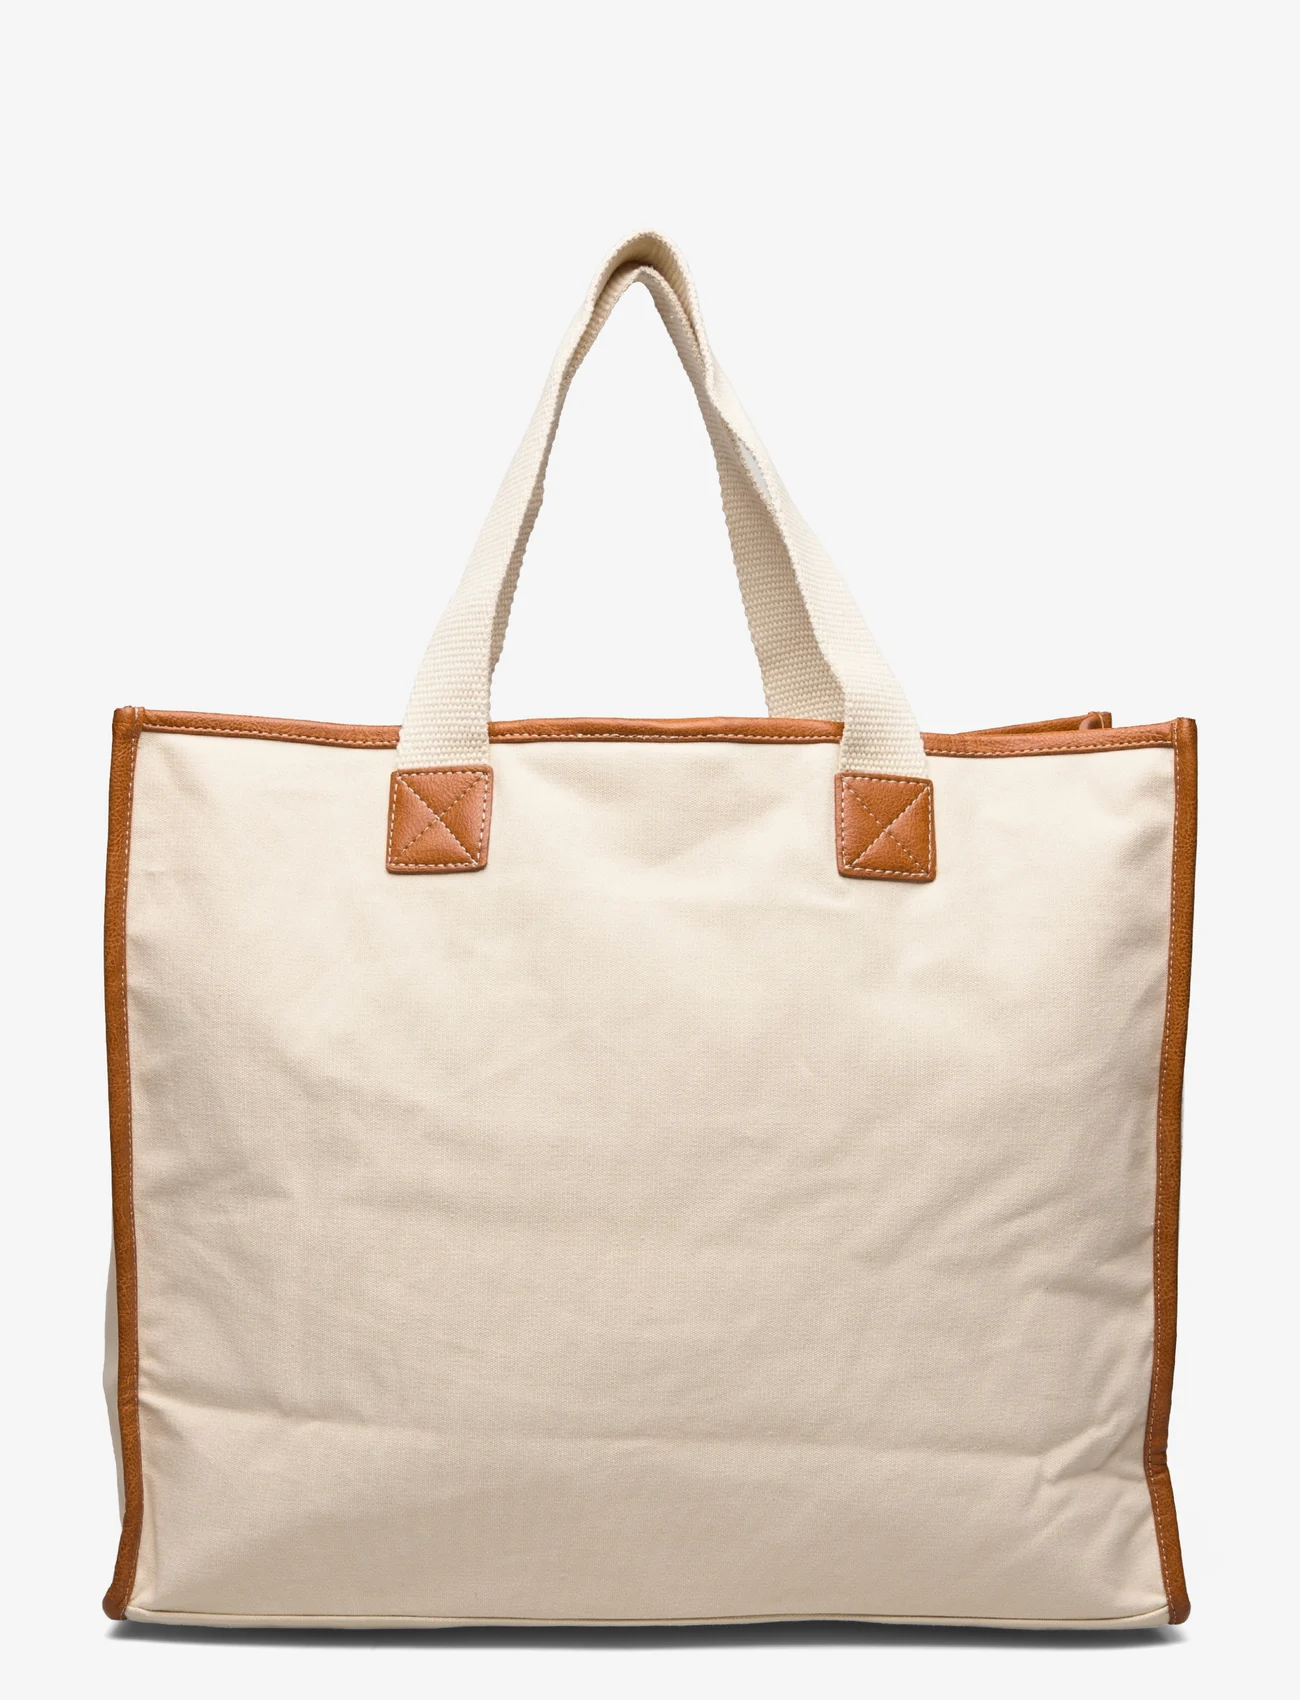 Seafolly - CarriedAway Canvas Tote - totes - sand - 1